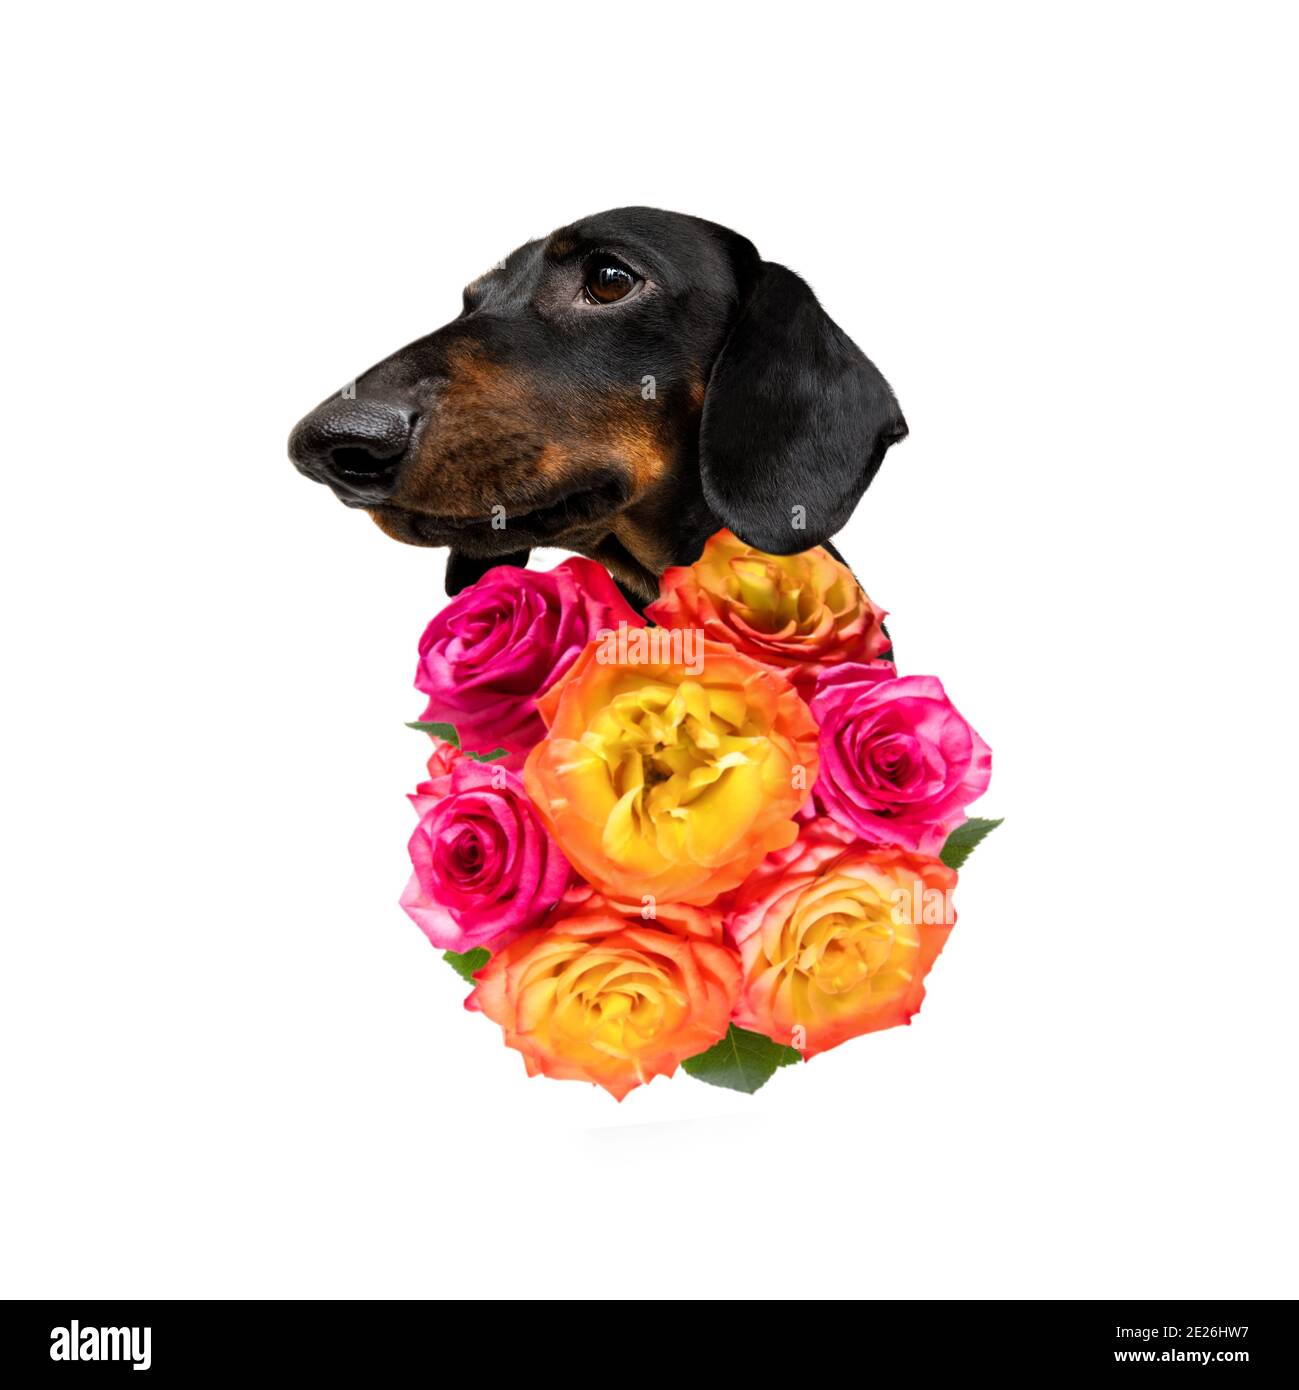 valentines mothers and fathers day dachshund sausage dog  with love flowers, isolated on white background or wedding Stock Photo